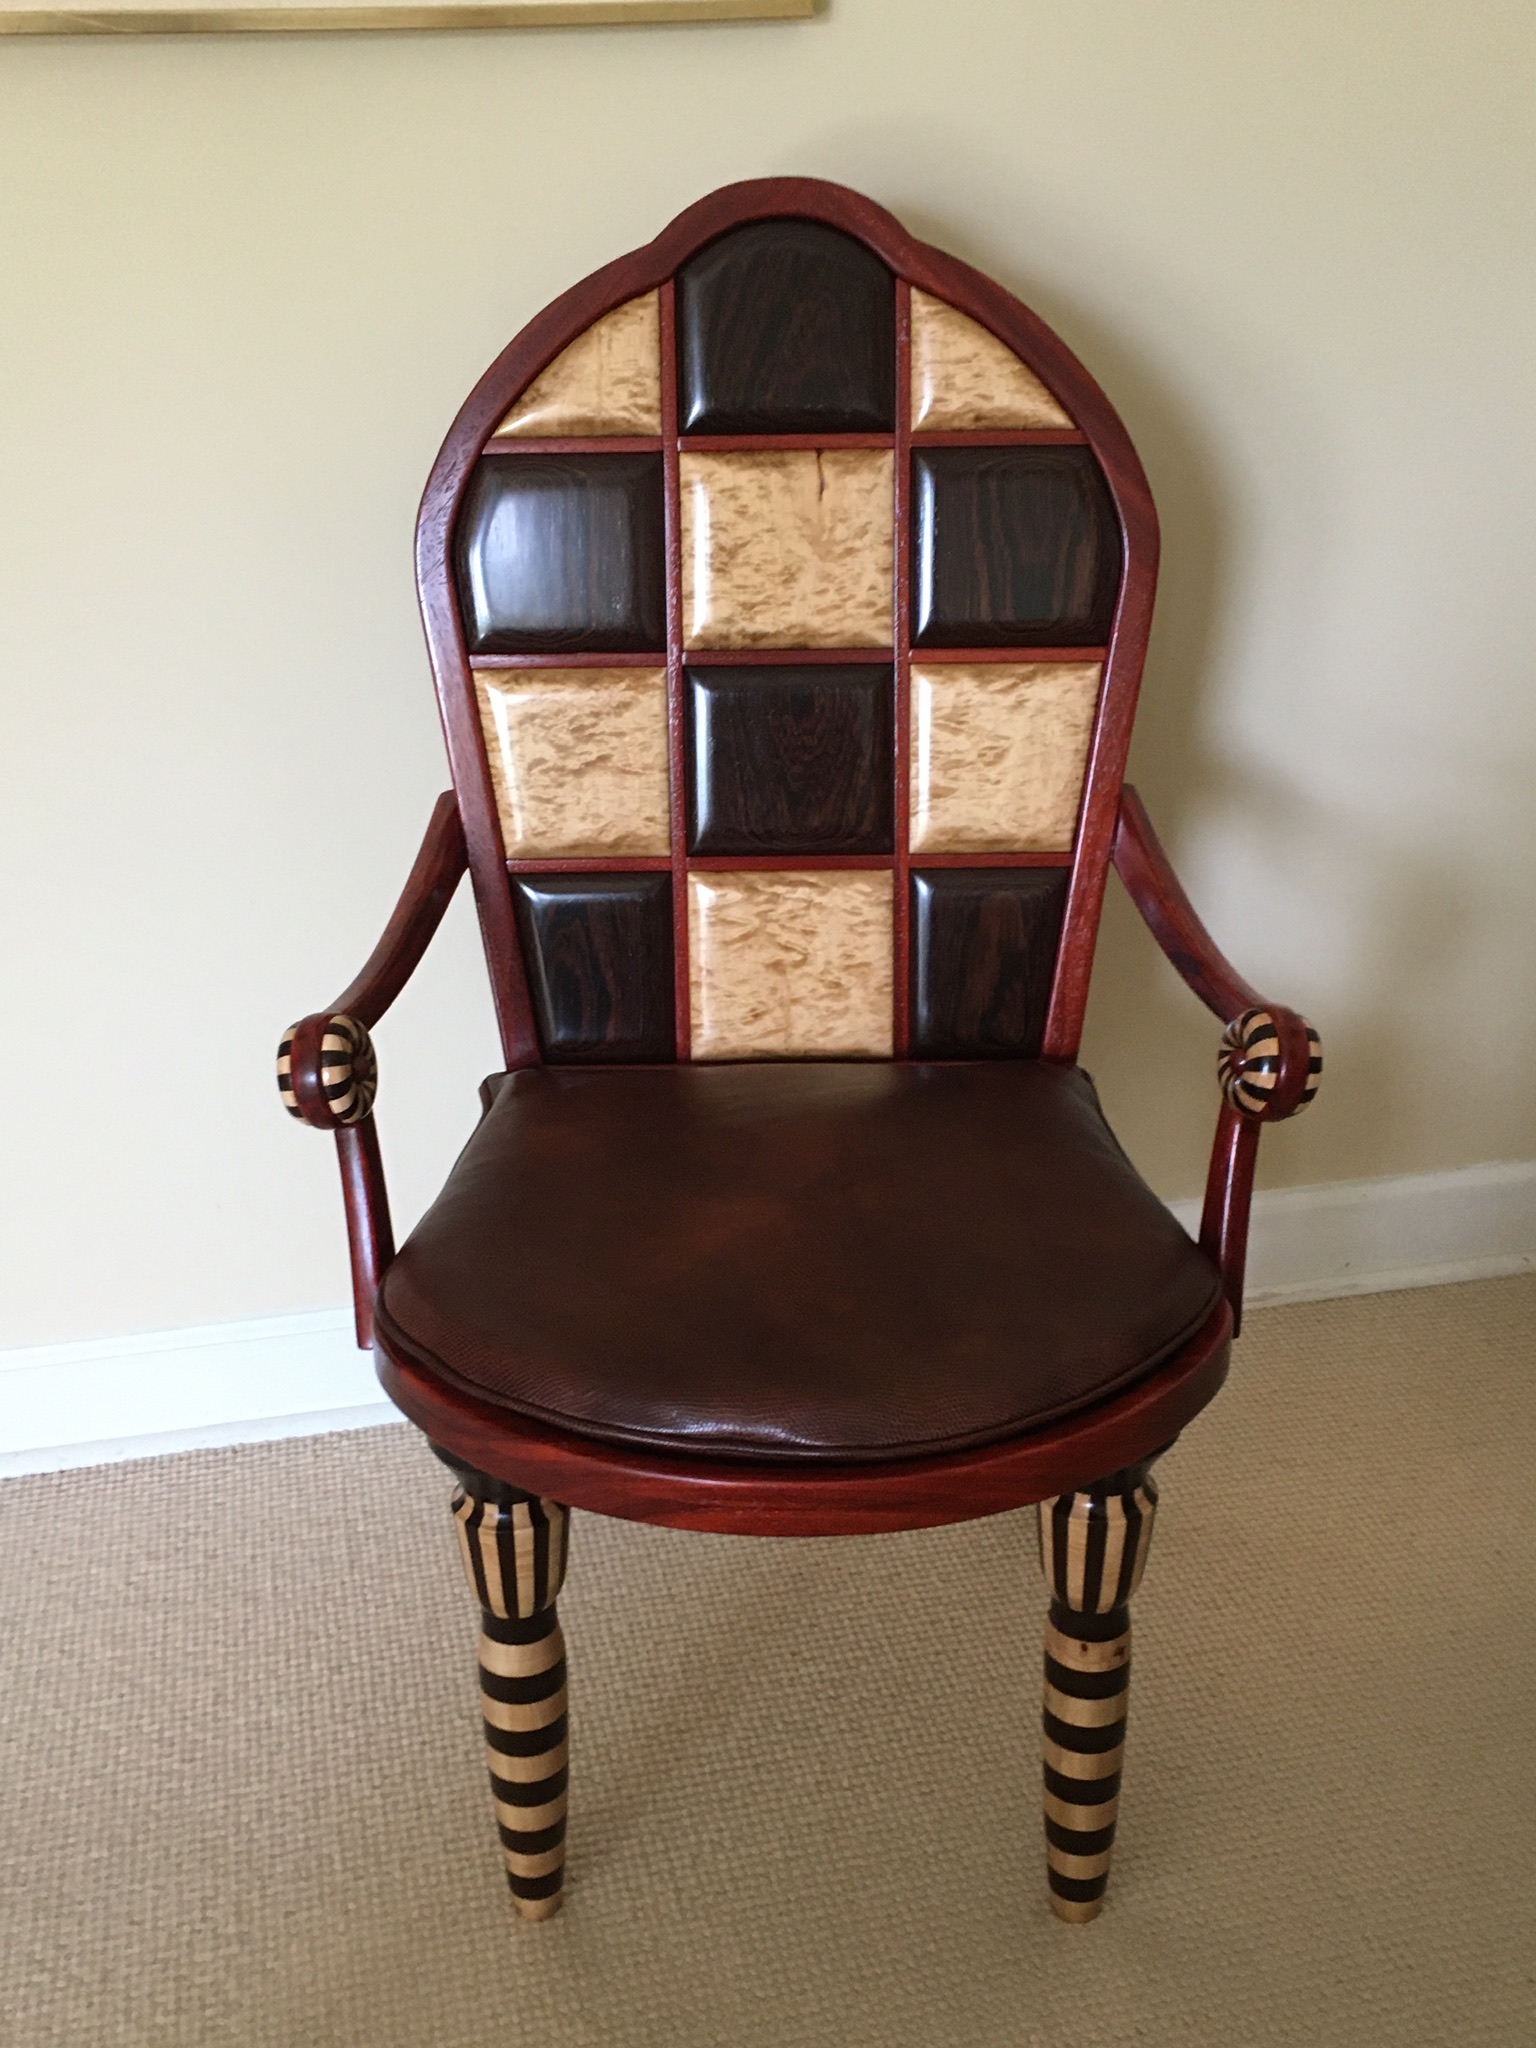 Inlayed and segmented chair